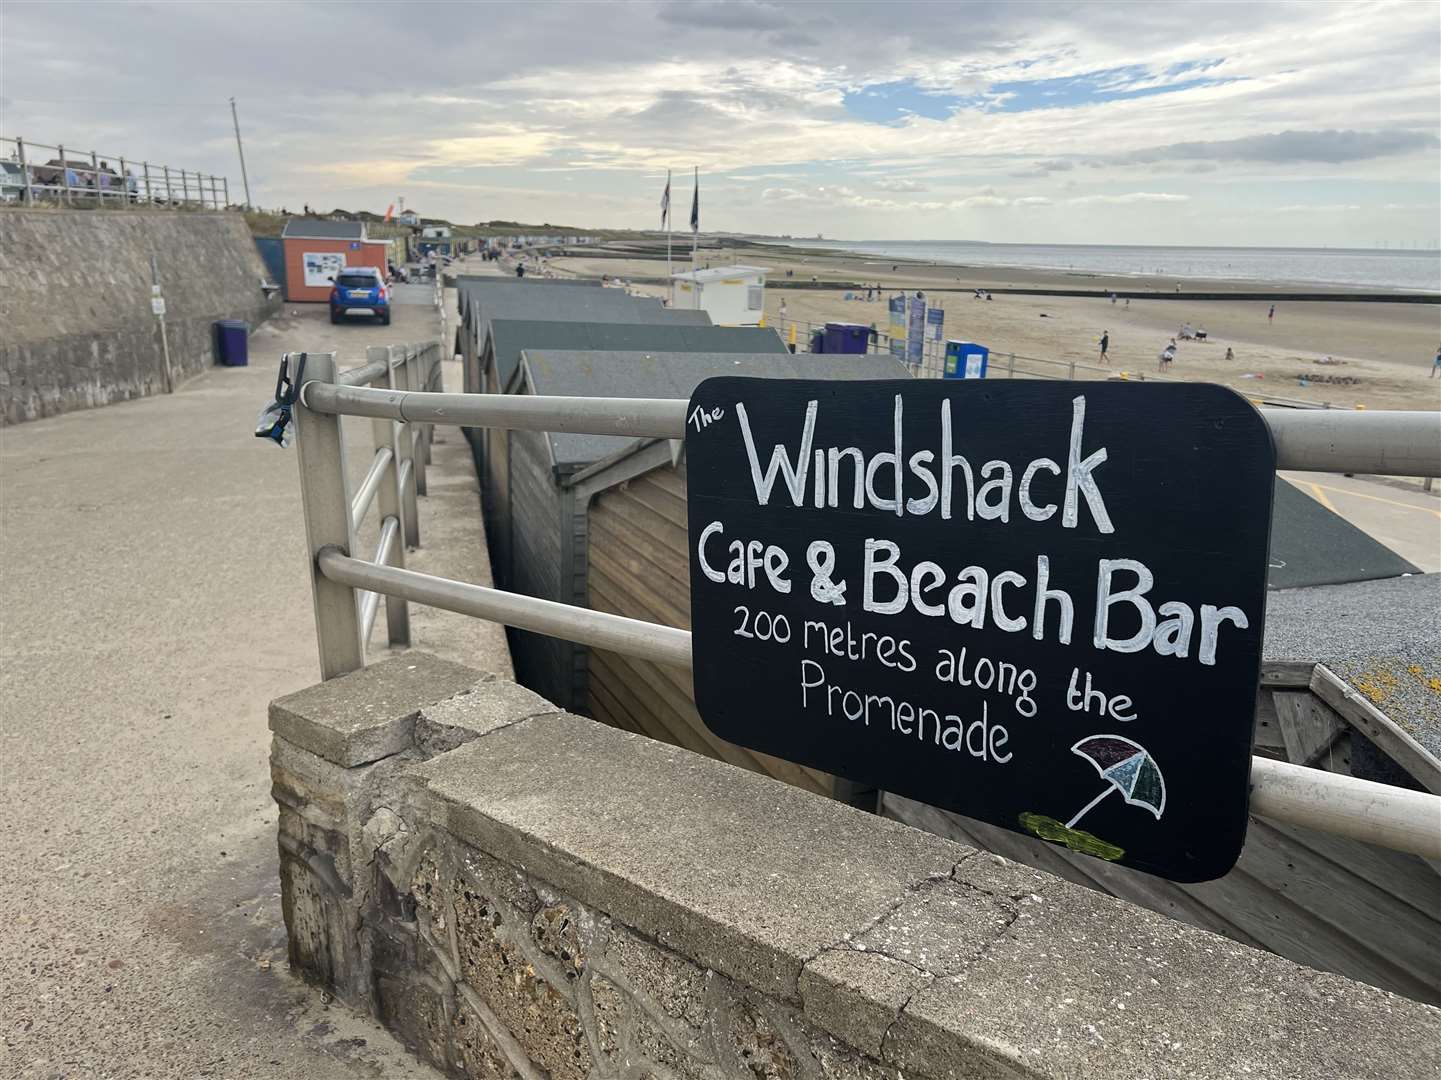 Head down onto the promenade and nestled behind the beach huts is The Windshack